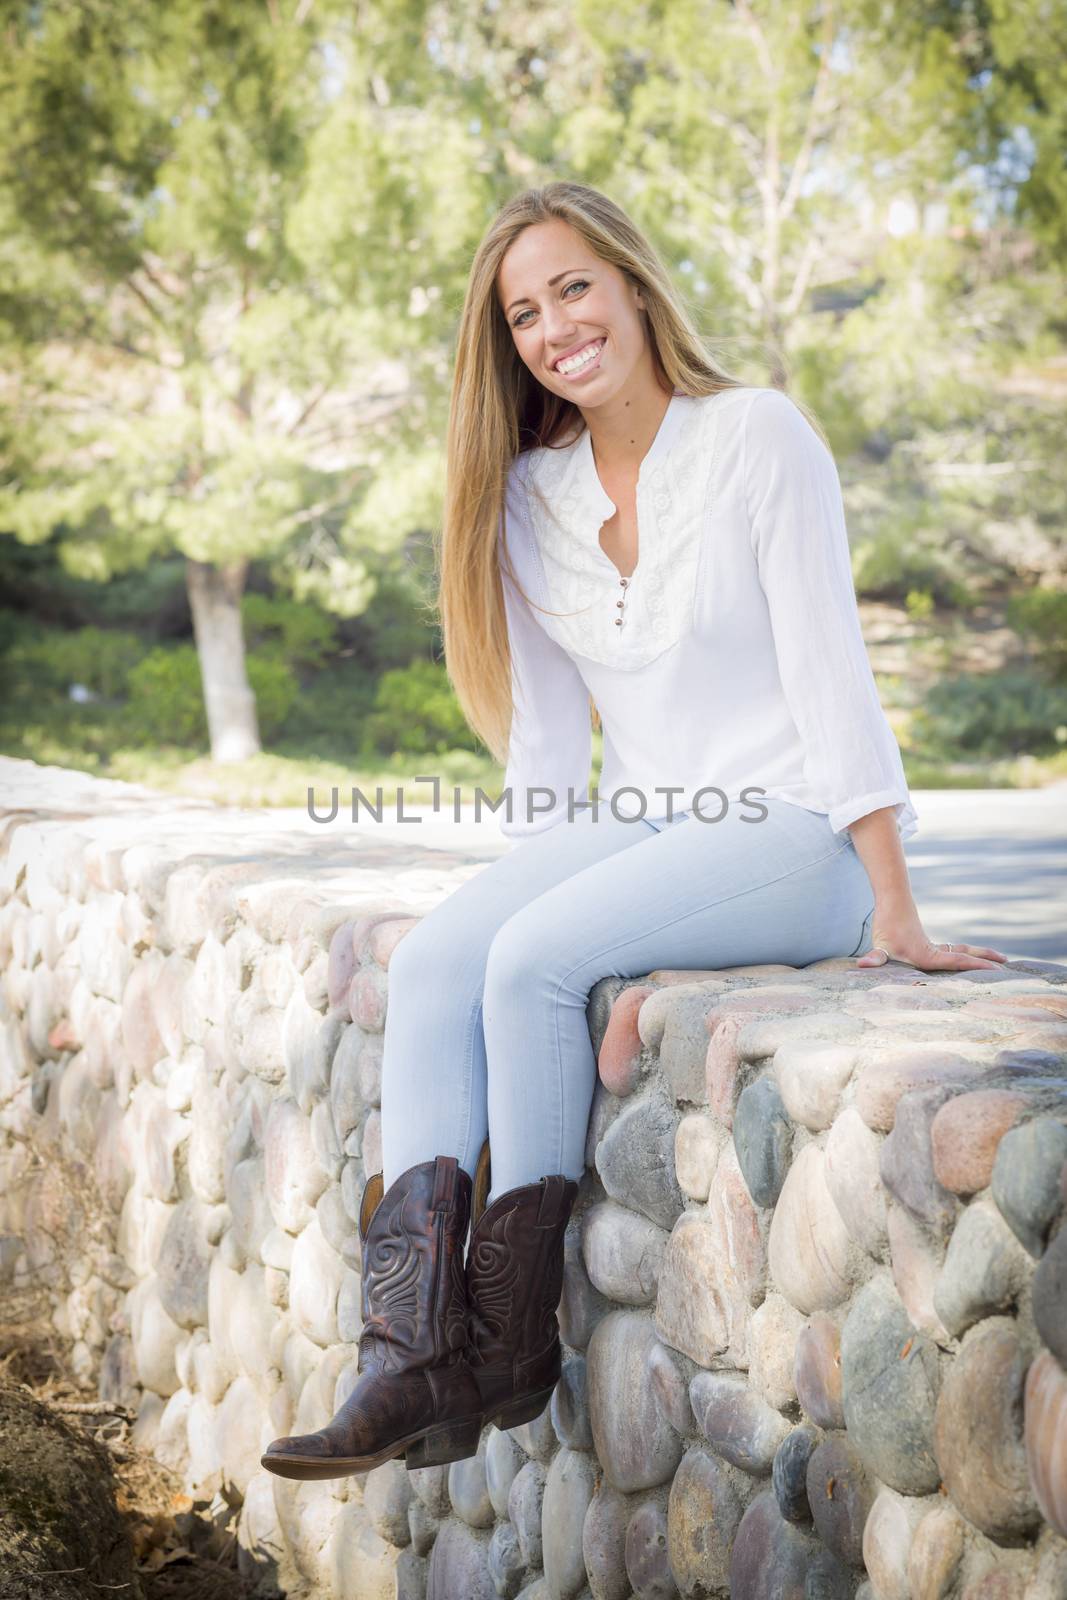 Portrait of a Beautiful Young Woman Outdoors at the Park.